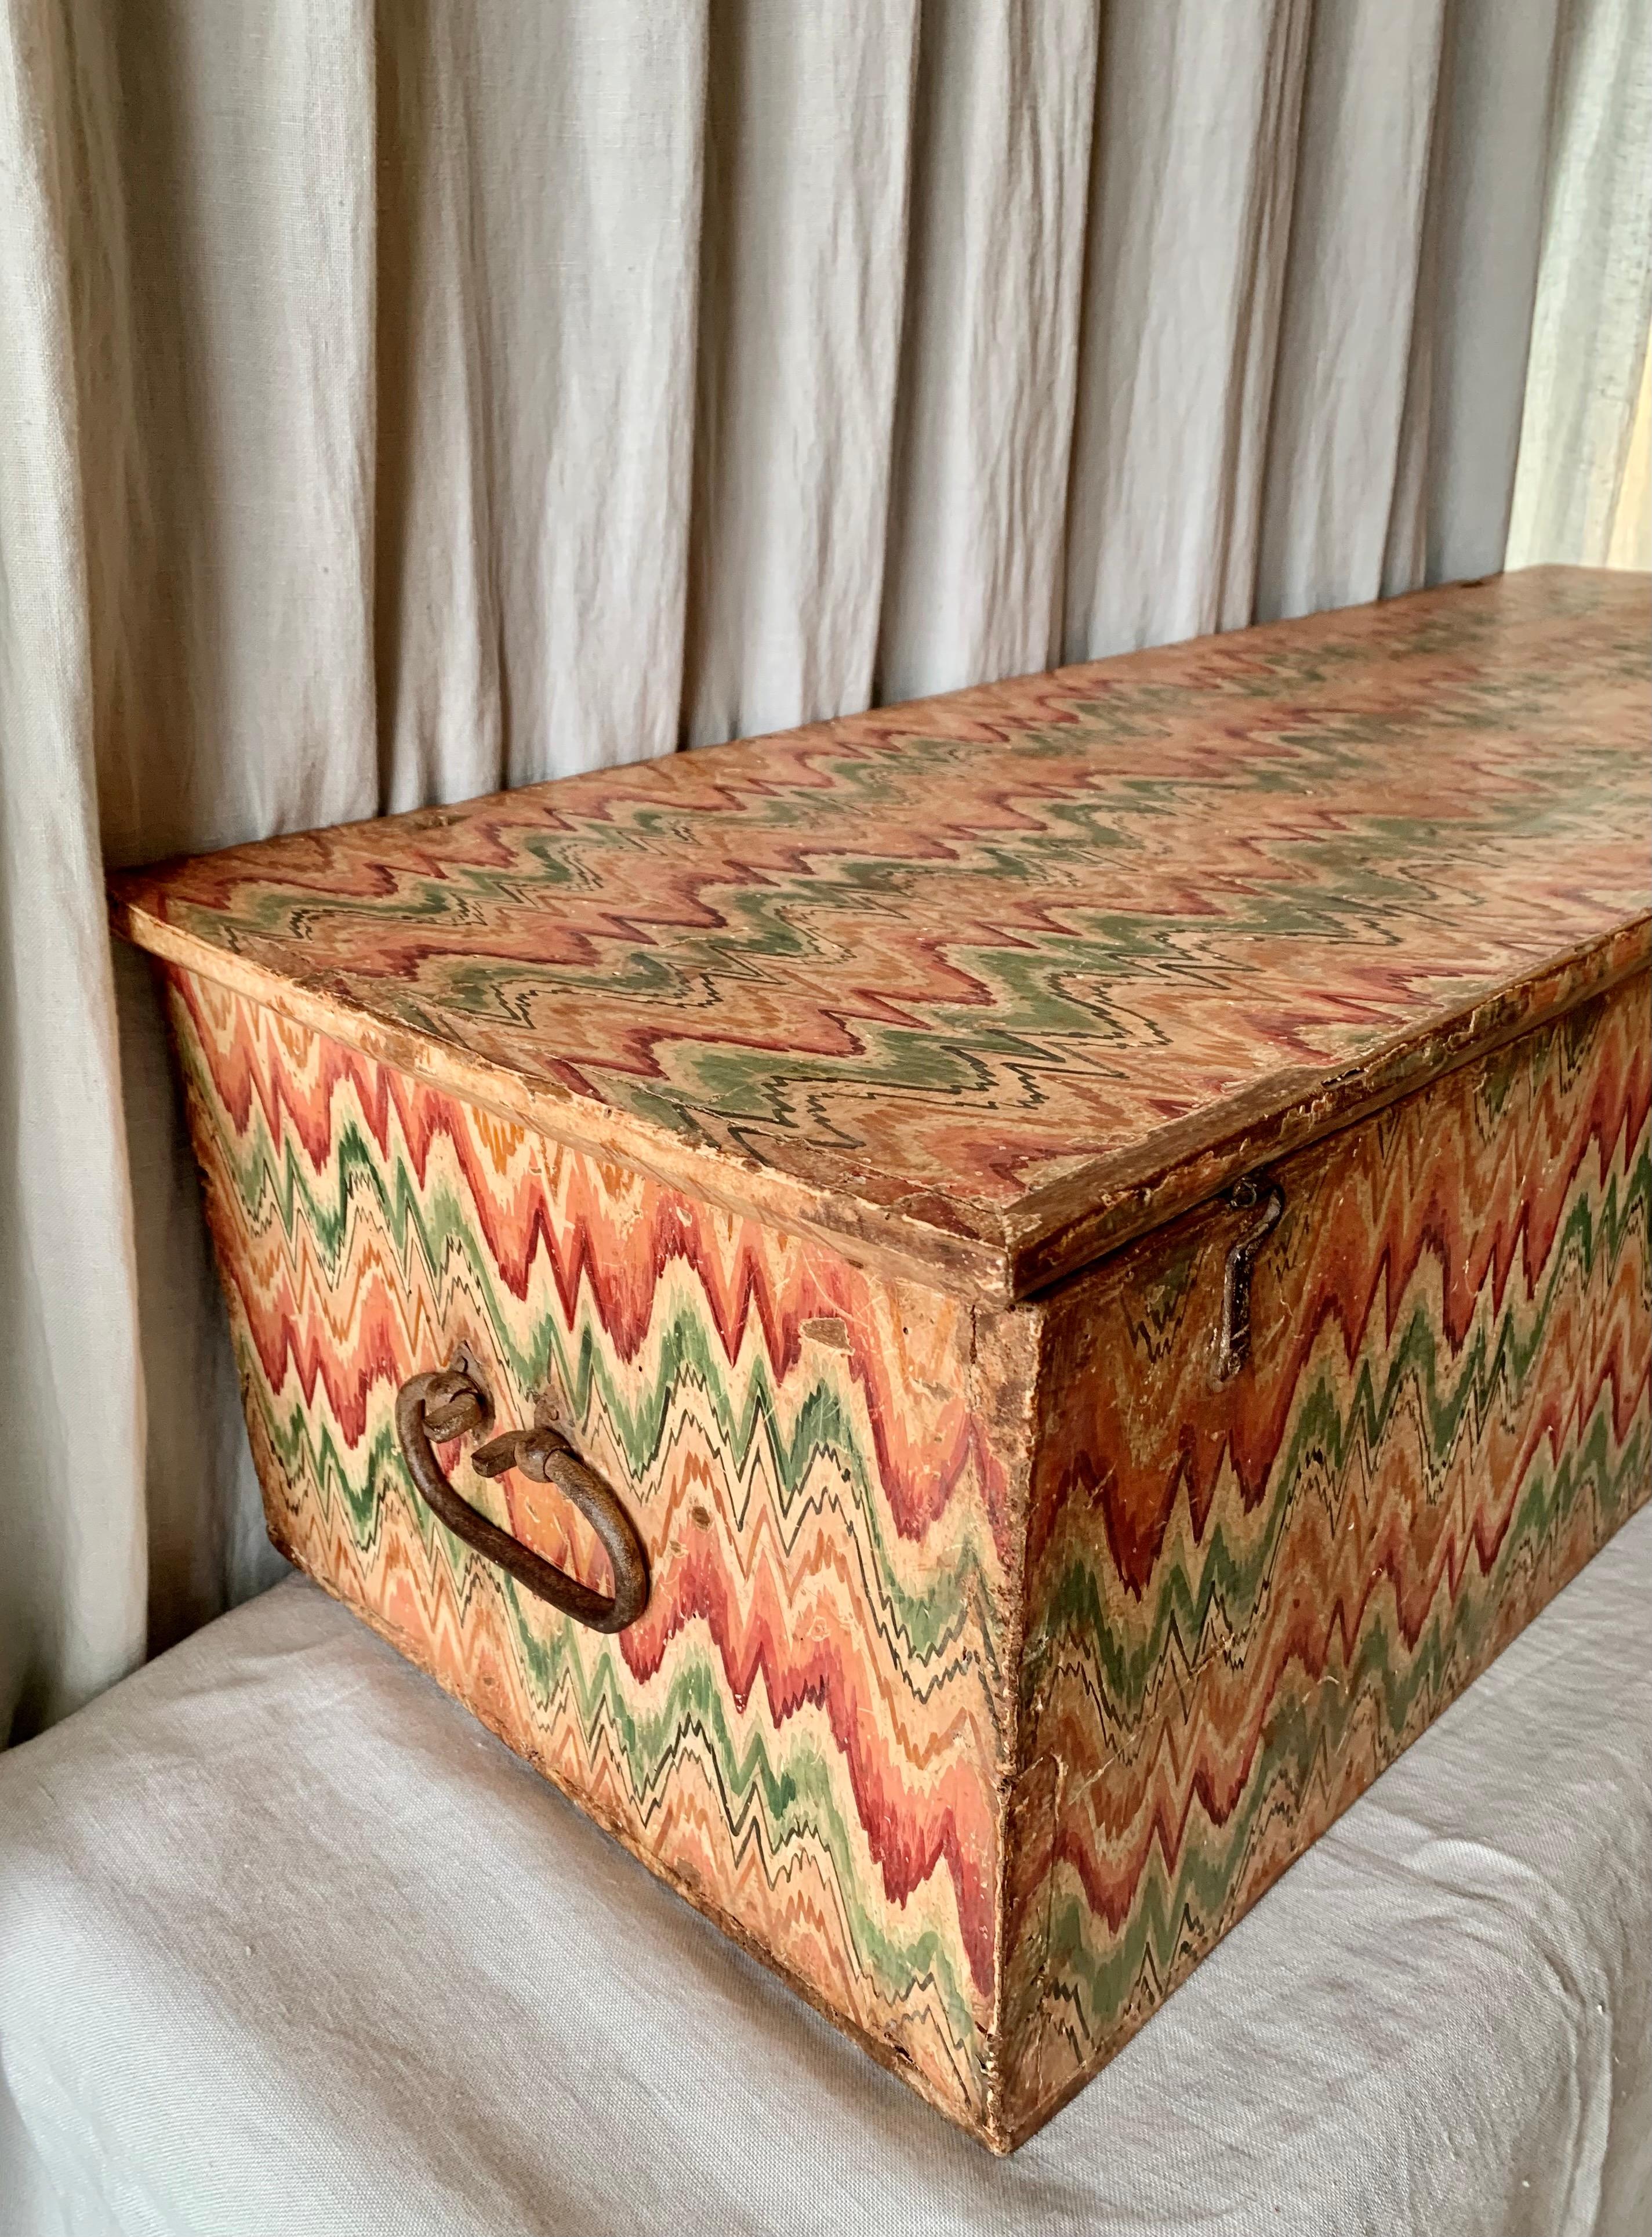 Late 18th Century 18th Century Italian Wooden Chest With Painted Decoration For Sale